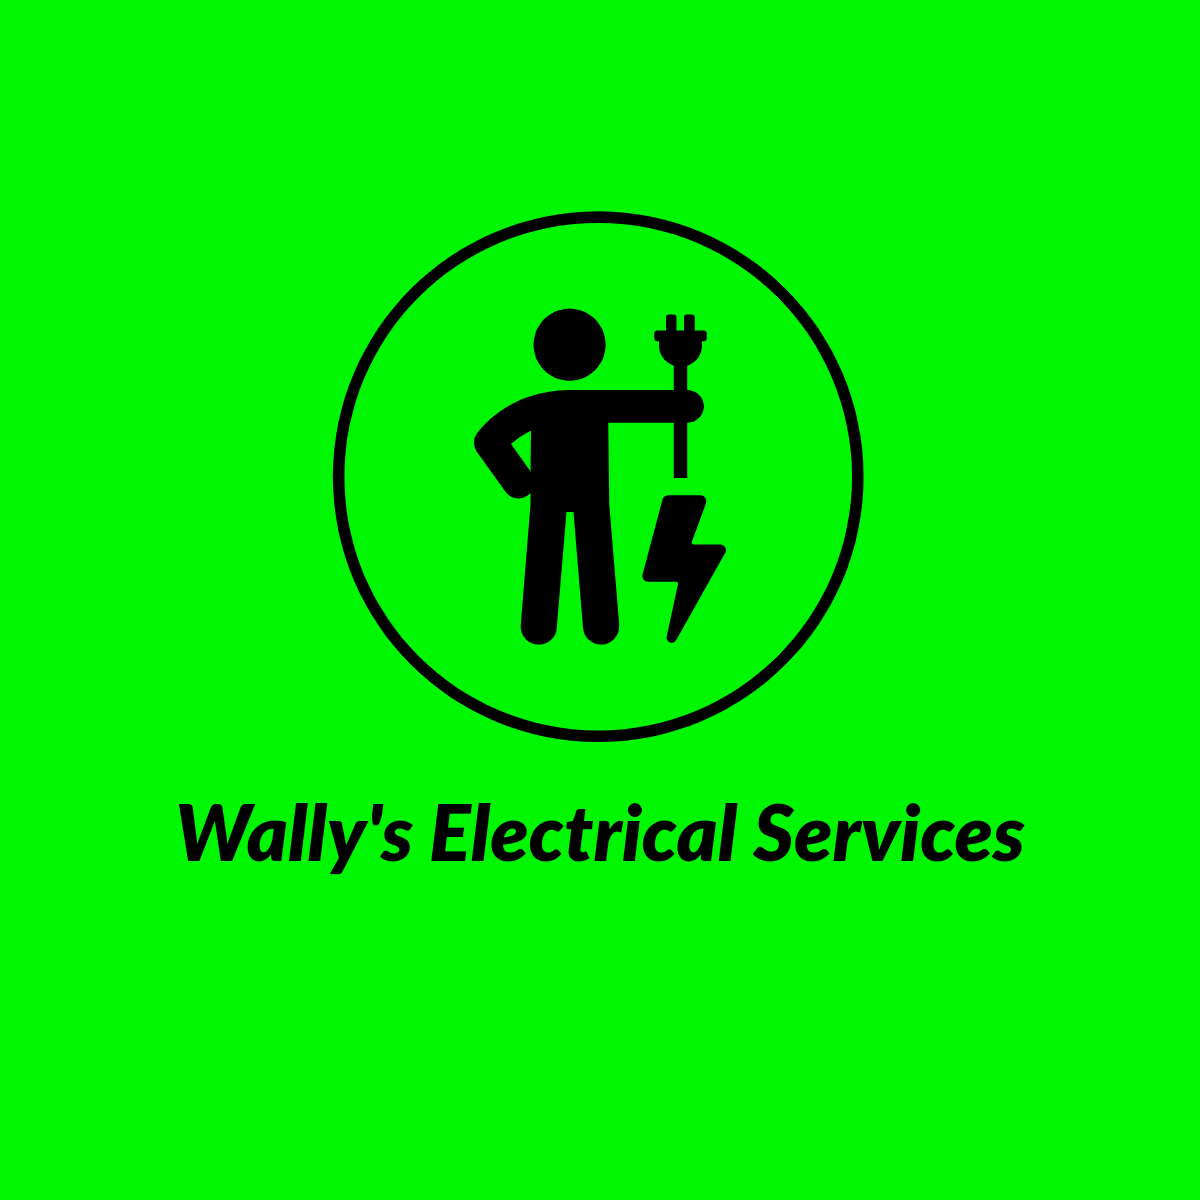 Wally's Electrical Services Logo